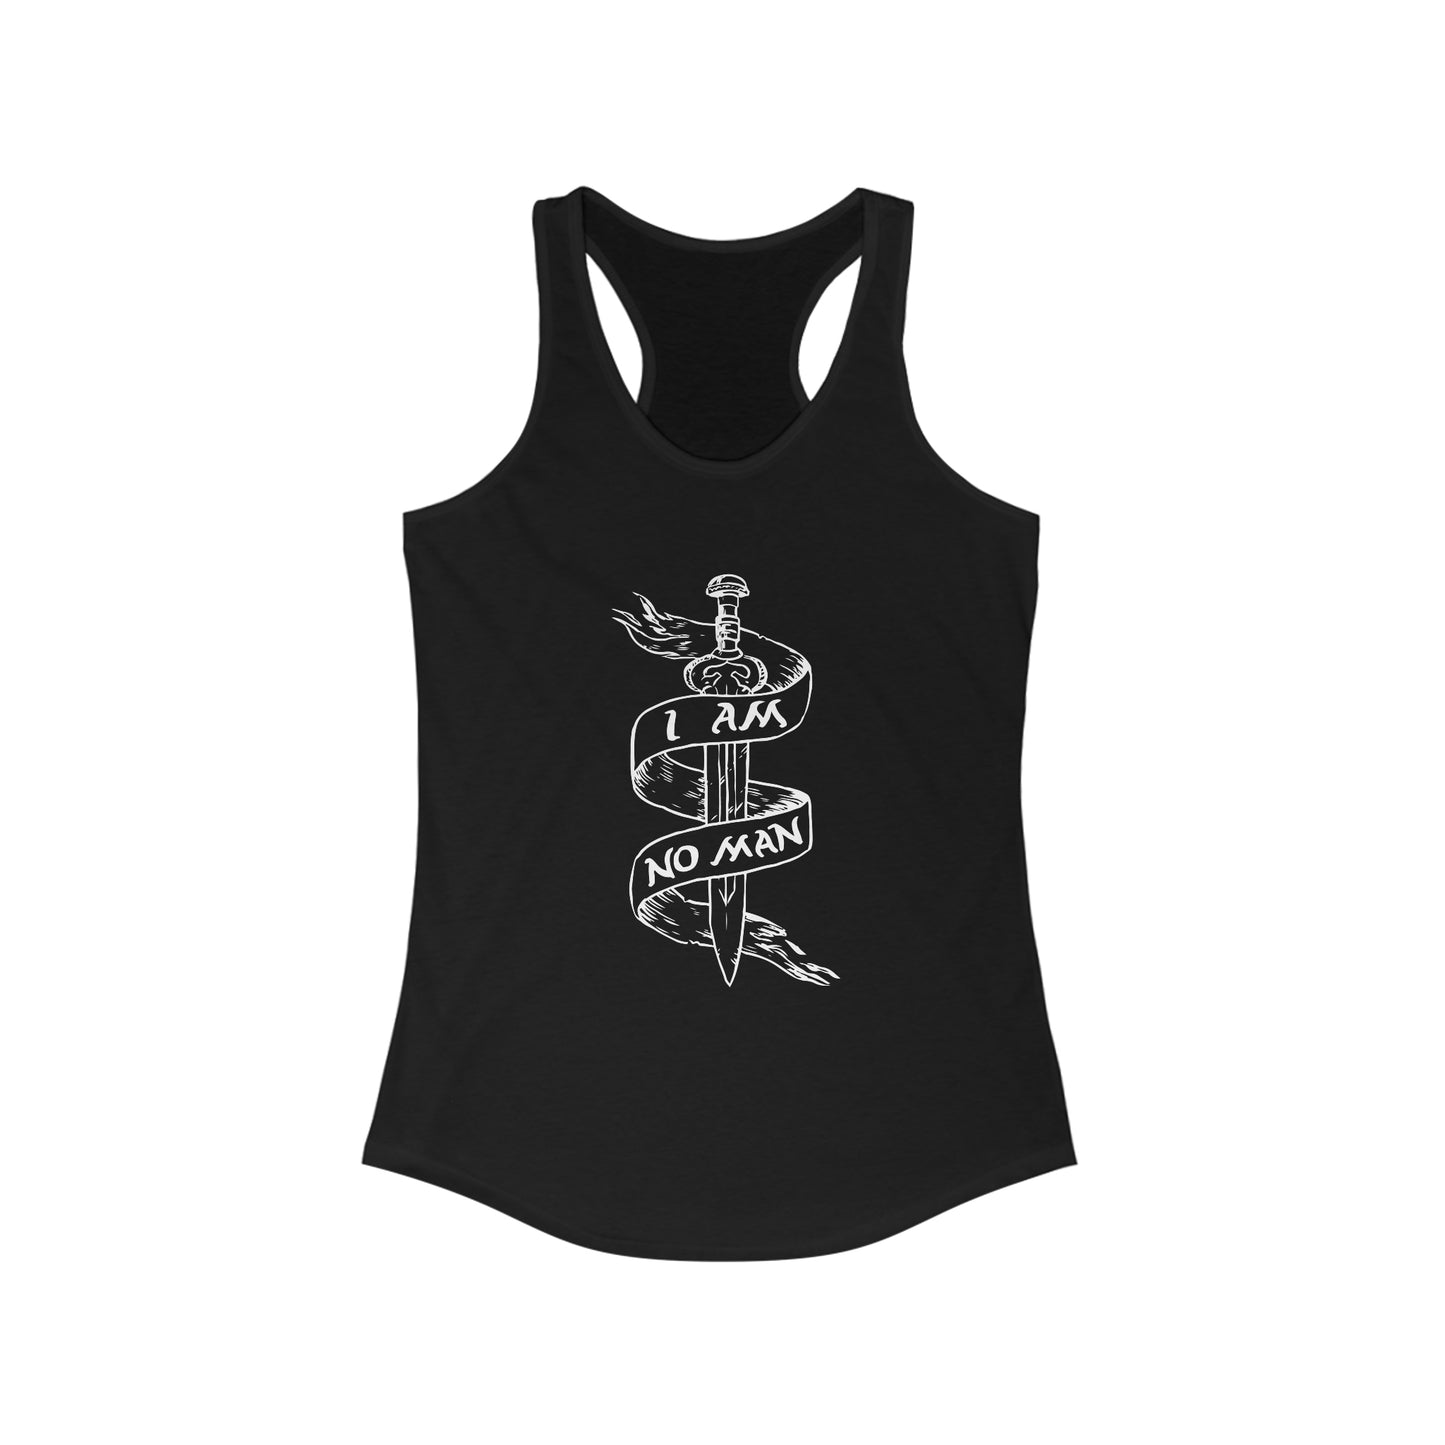 I Am No Man Women's Racerback Tank - Lord of the Rings